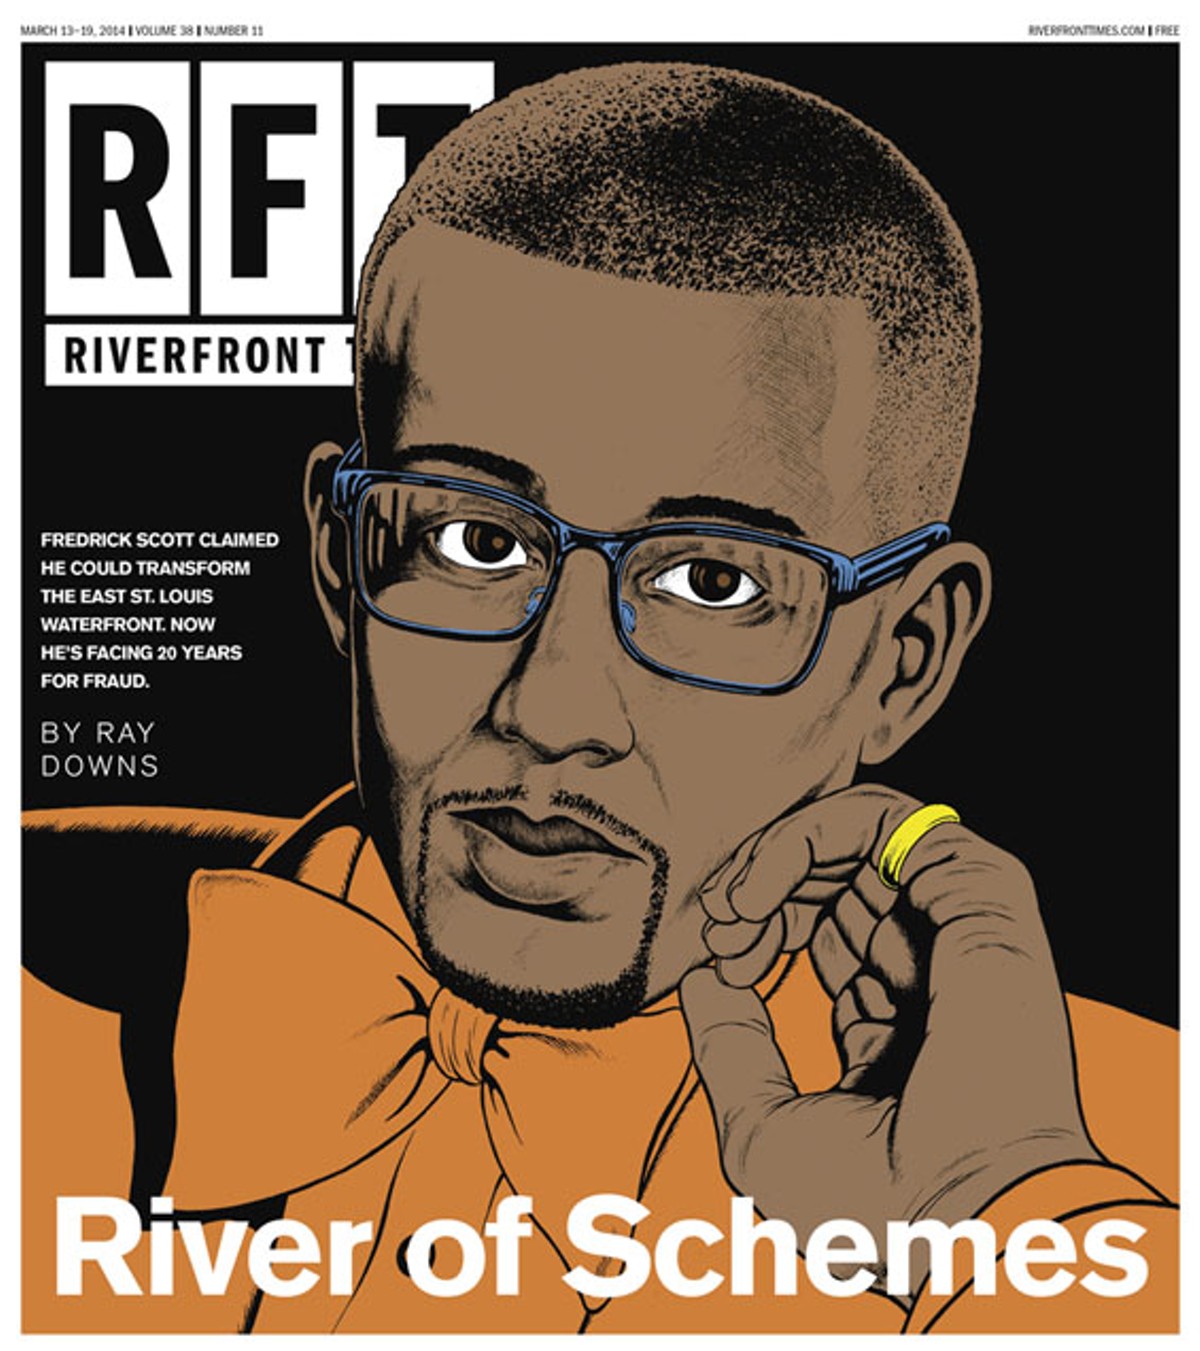 The Cover of the March 13 Print Edition